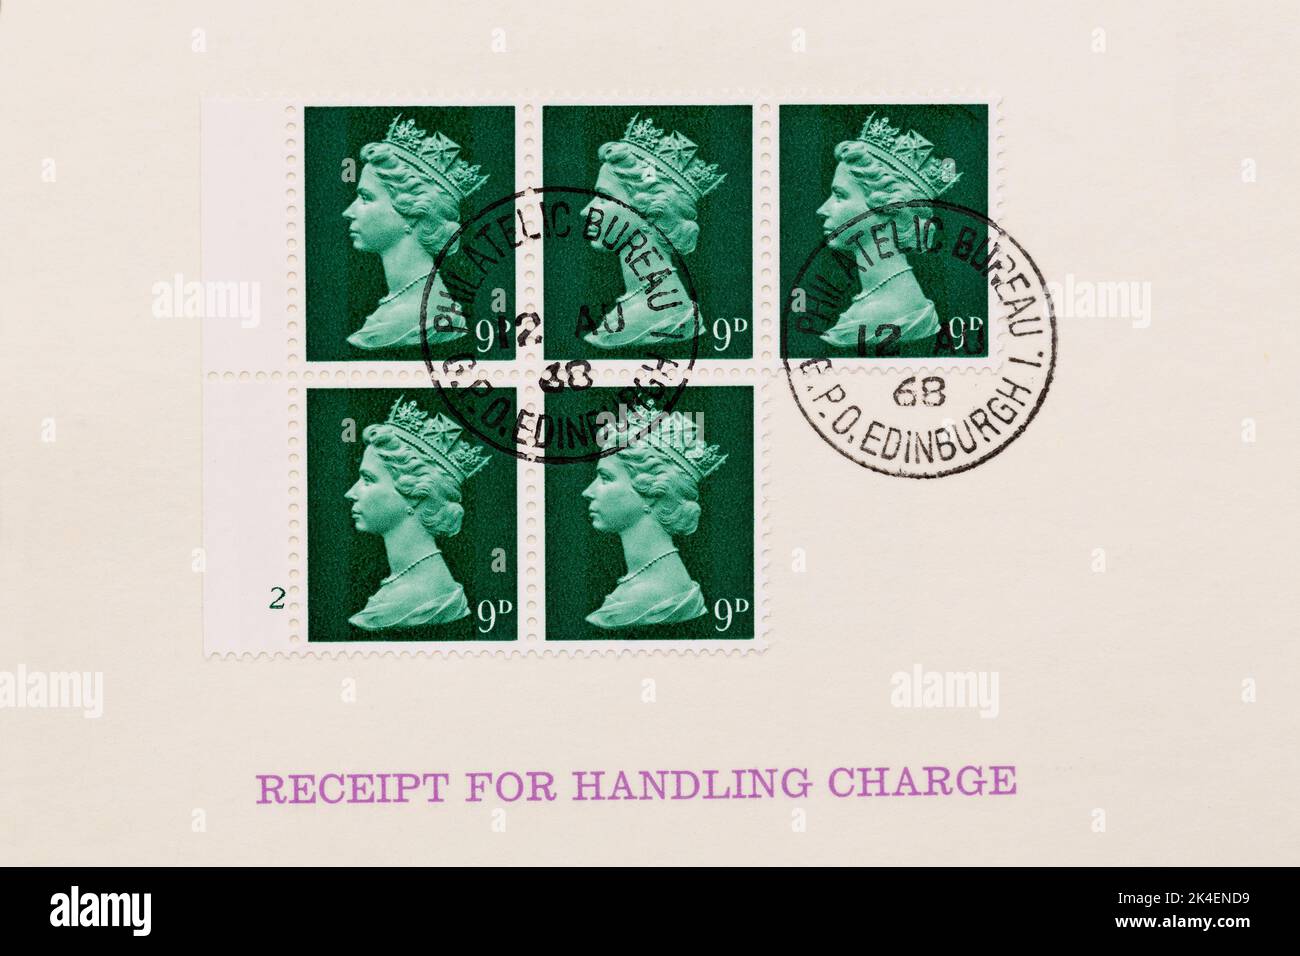 Set of 5 UK postage stamps from 1968. Stuck on a card used to provide a receipt for handling charge. Postmarked Philatelic Bureau Edinburgh GPO. Stock Photo